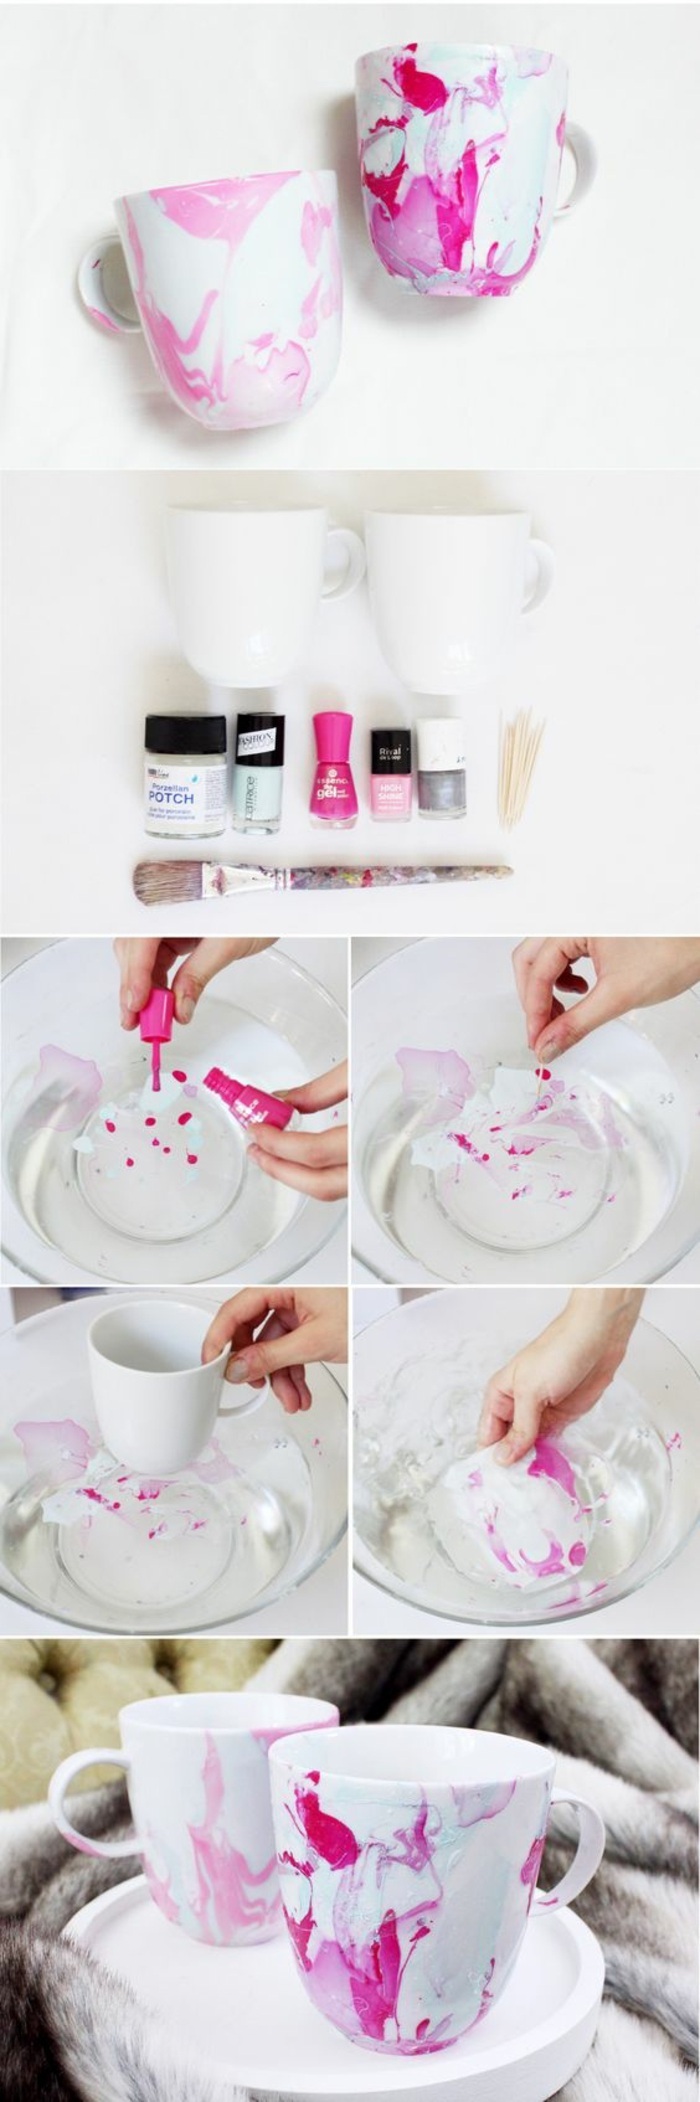 white coffee mugs, pink and silver nail polish, fun diy projects, step by step tutorial